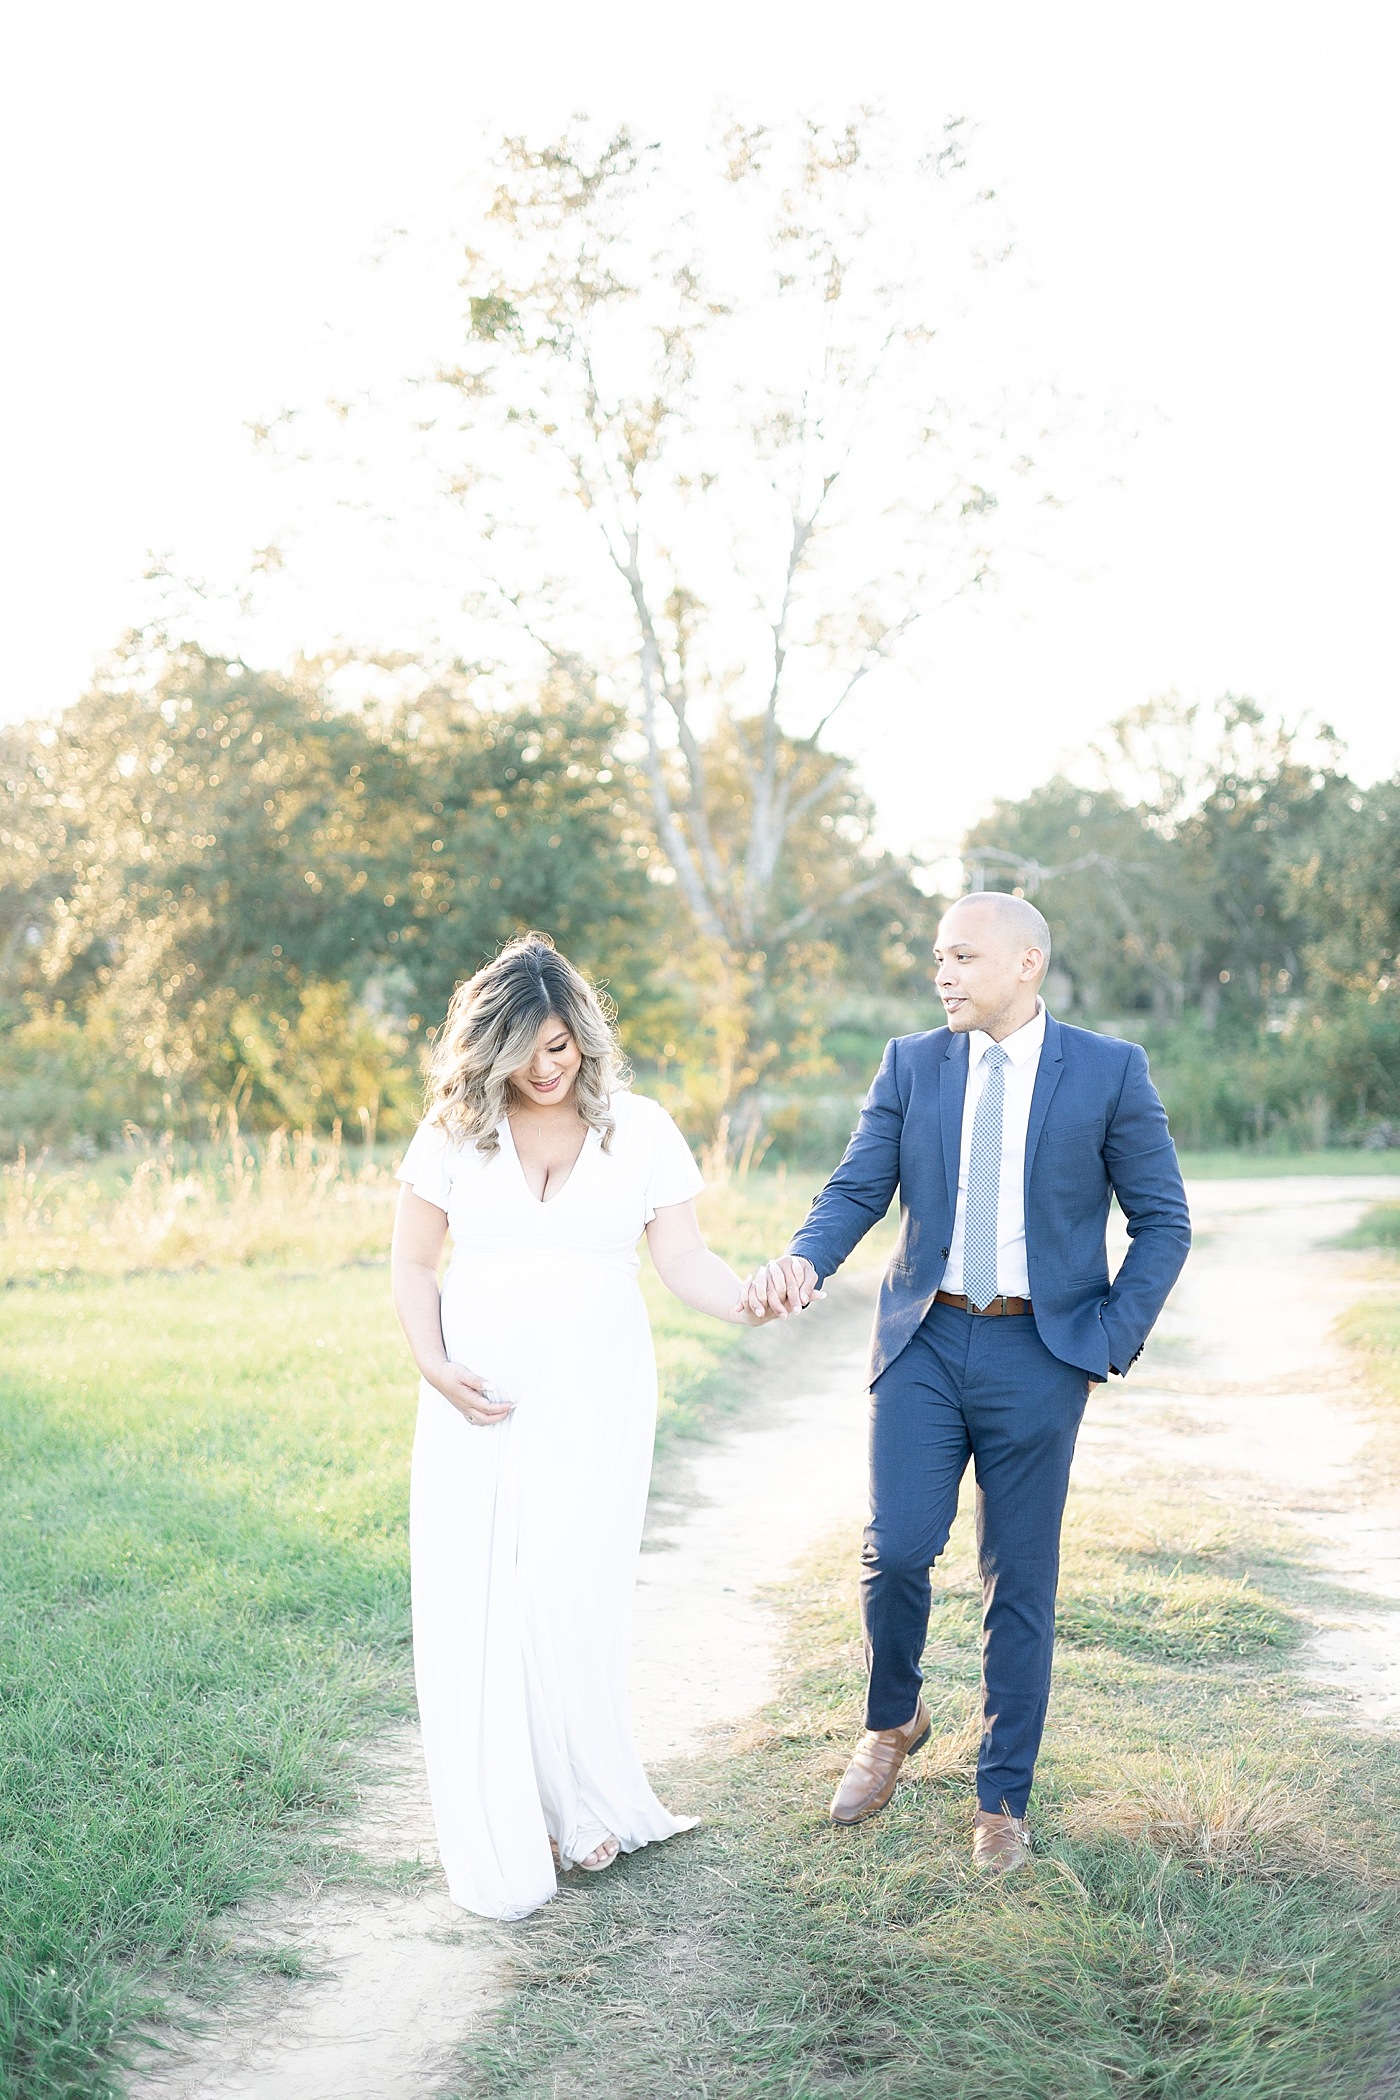 Mom and dad to be walking a path | Photo by Little Sunshine Photography